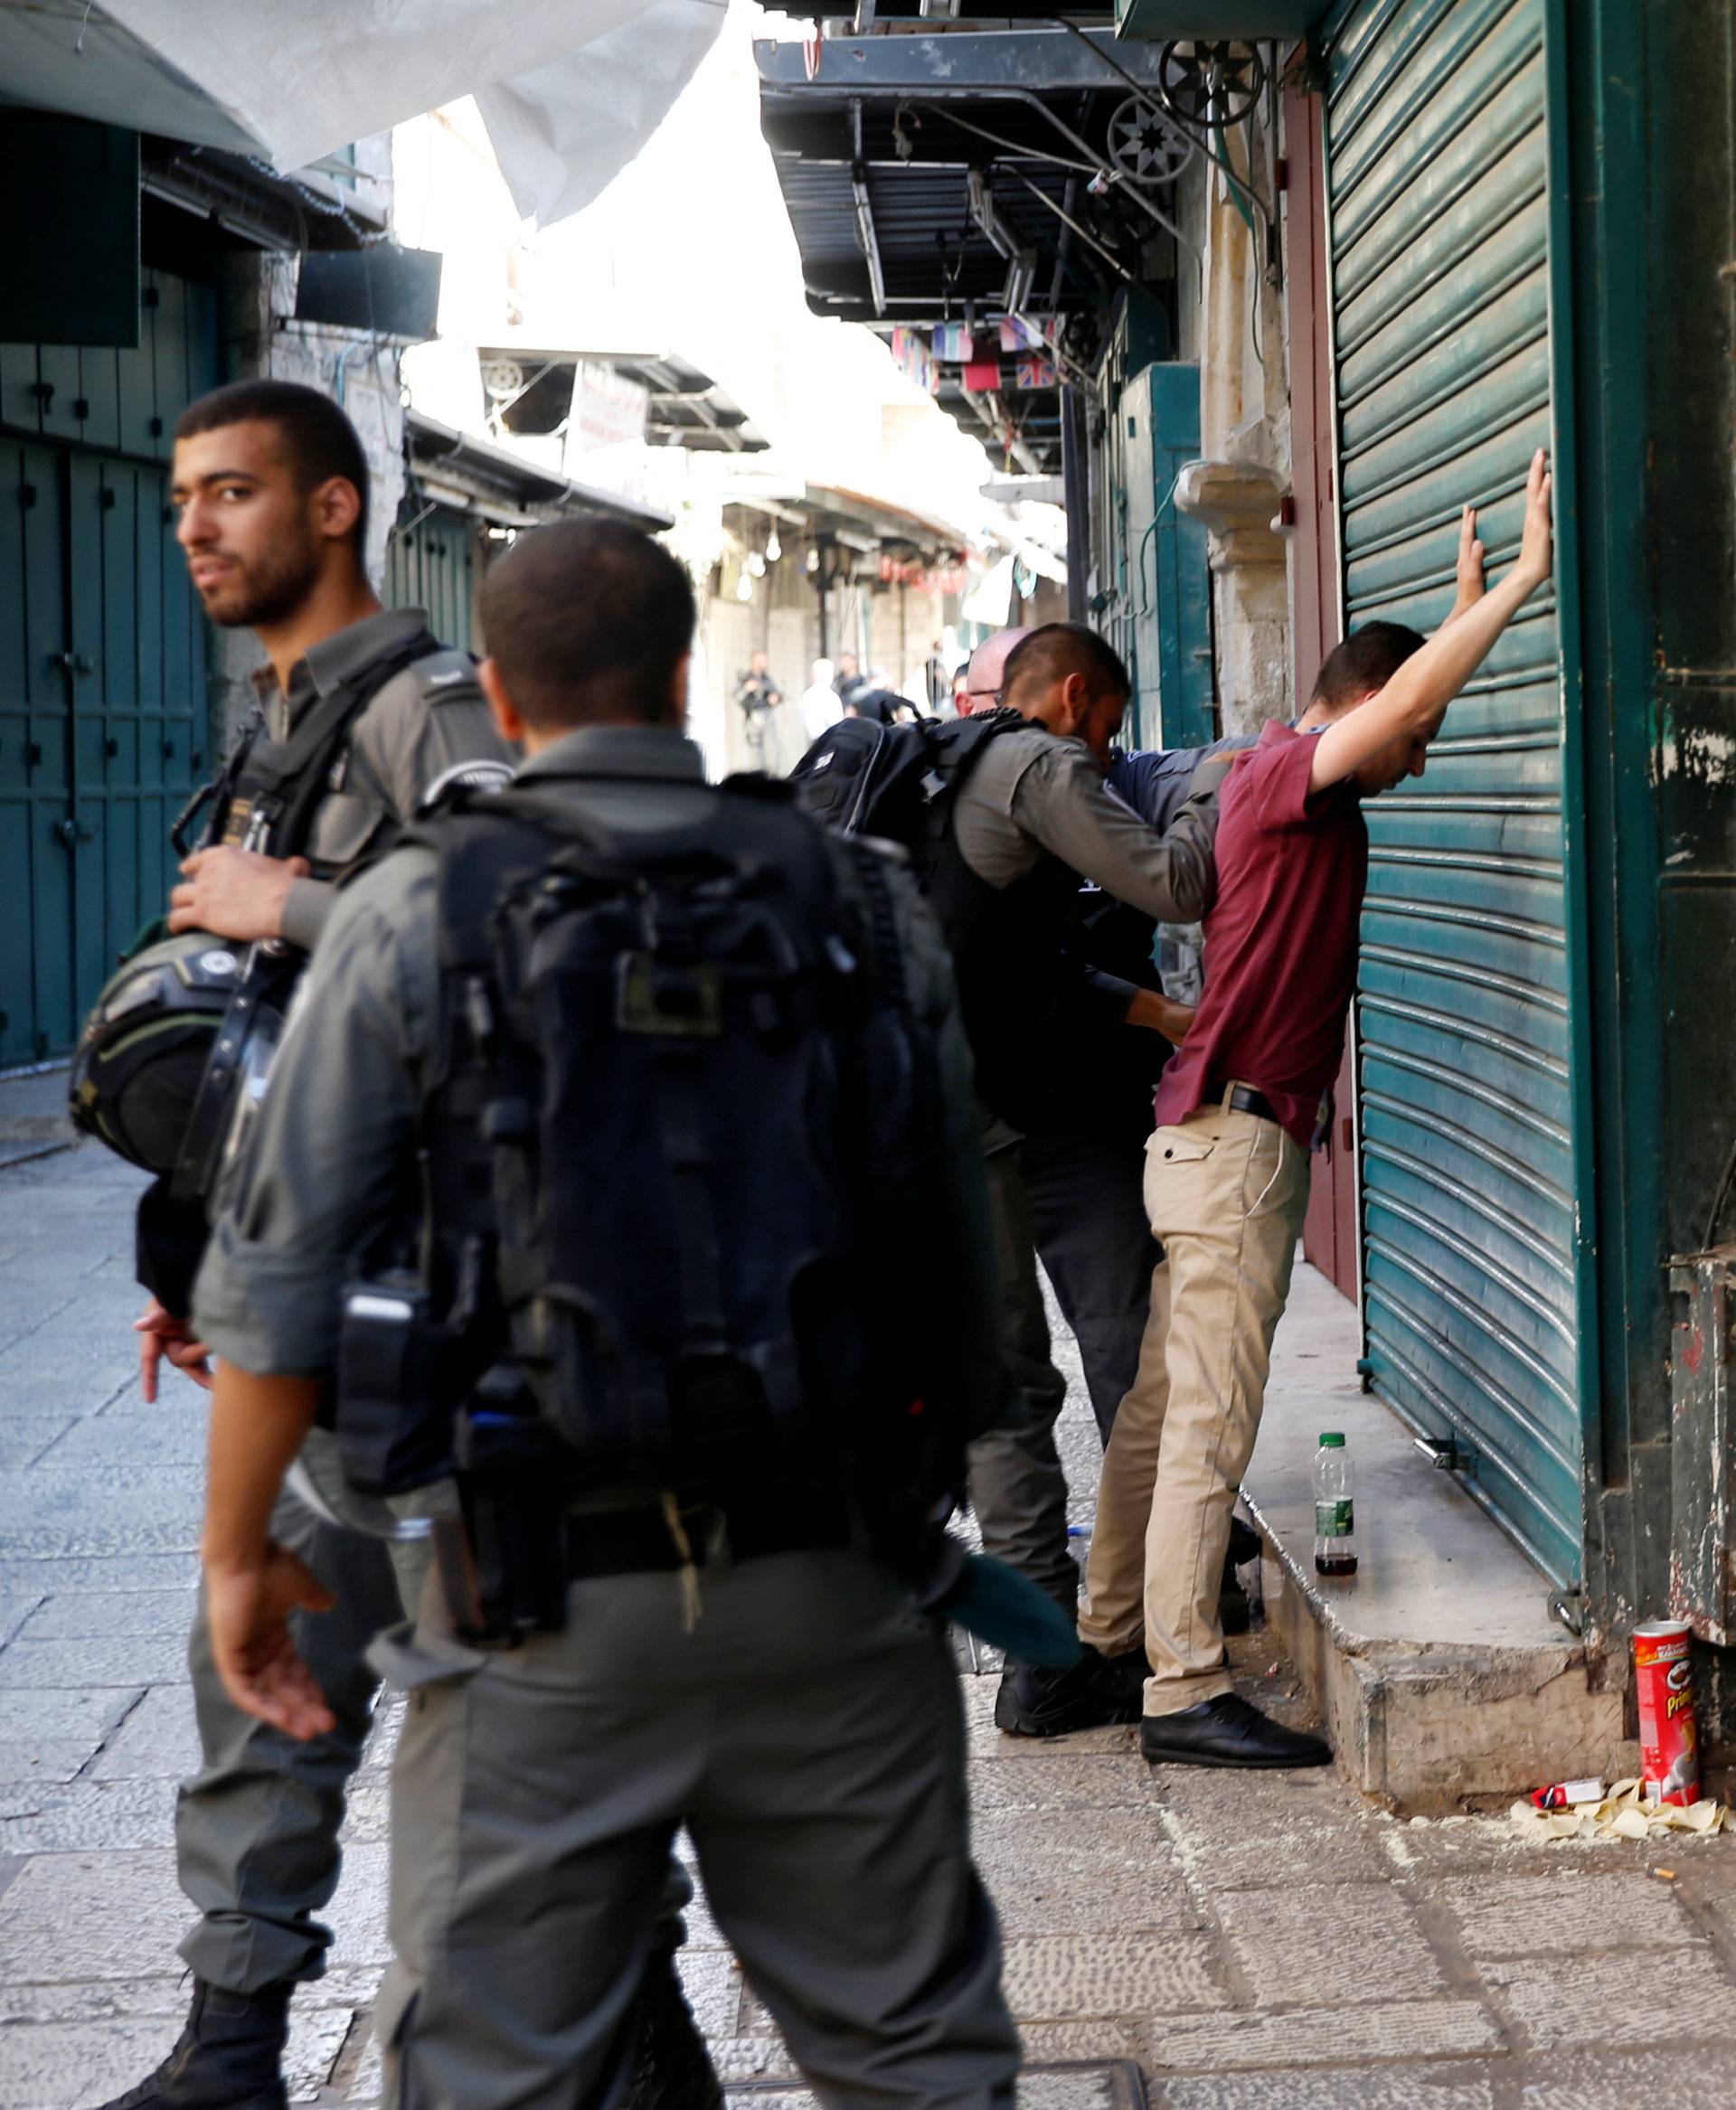 Israeli border policemen perform a body search on a Palestinian man in Jerusalem's Old City